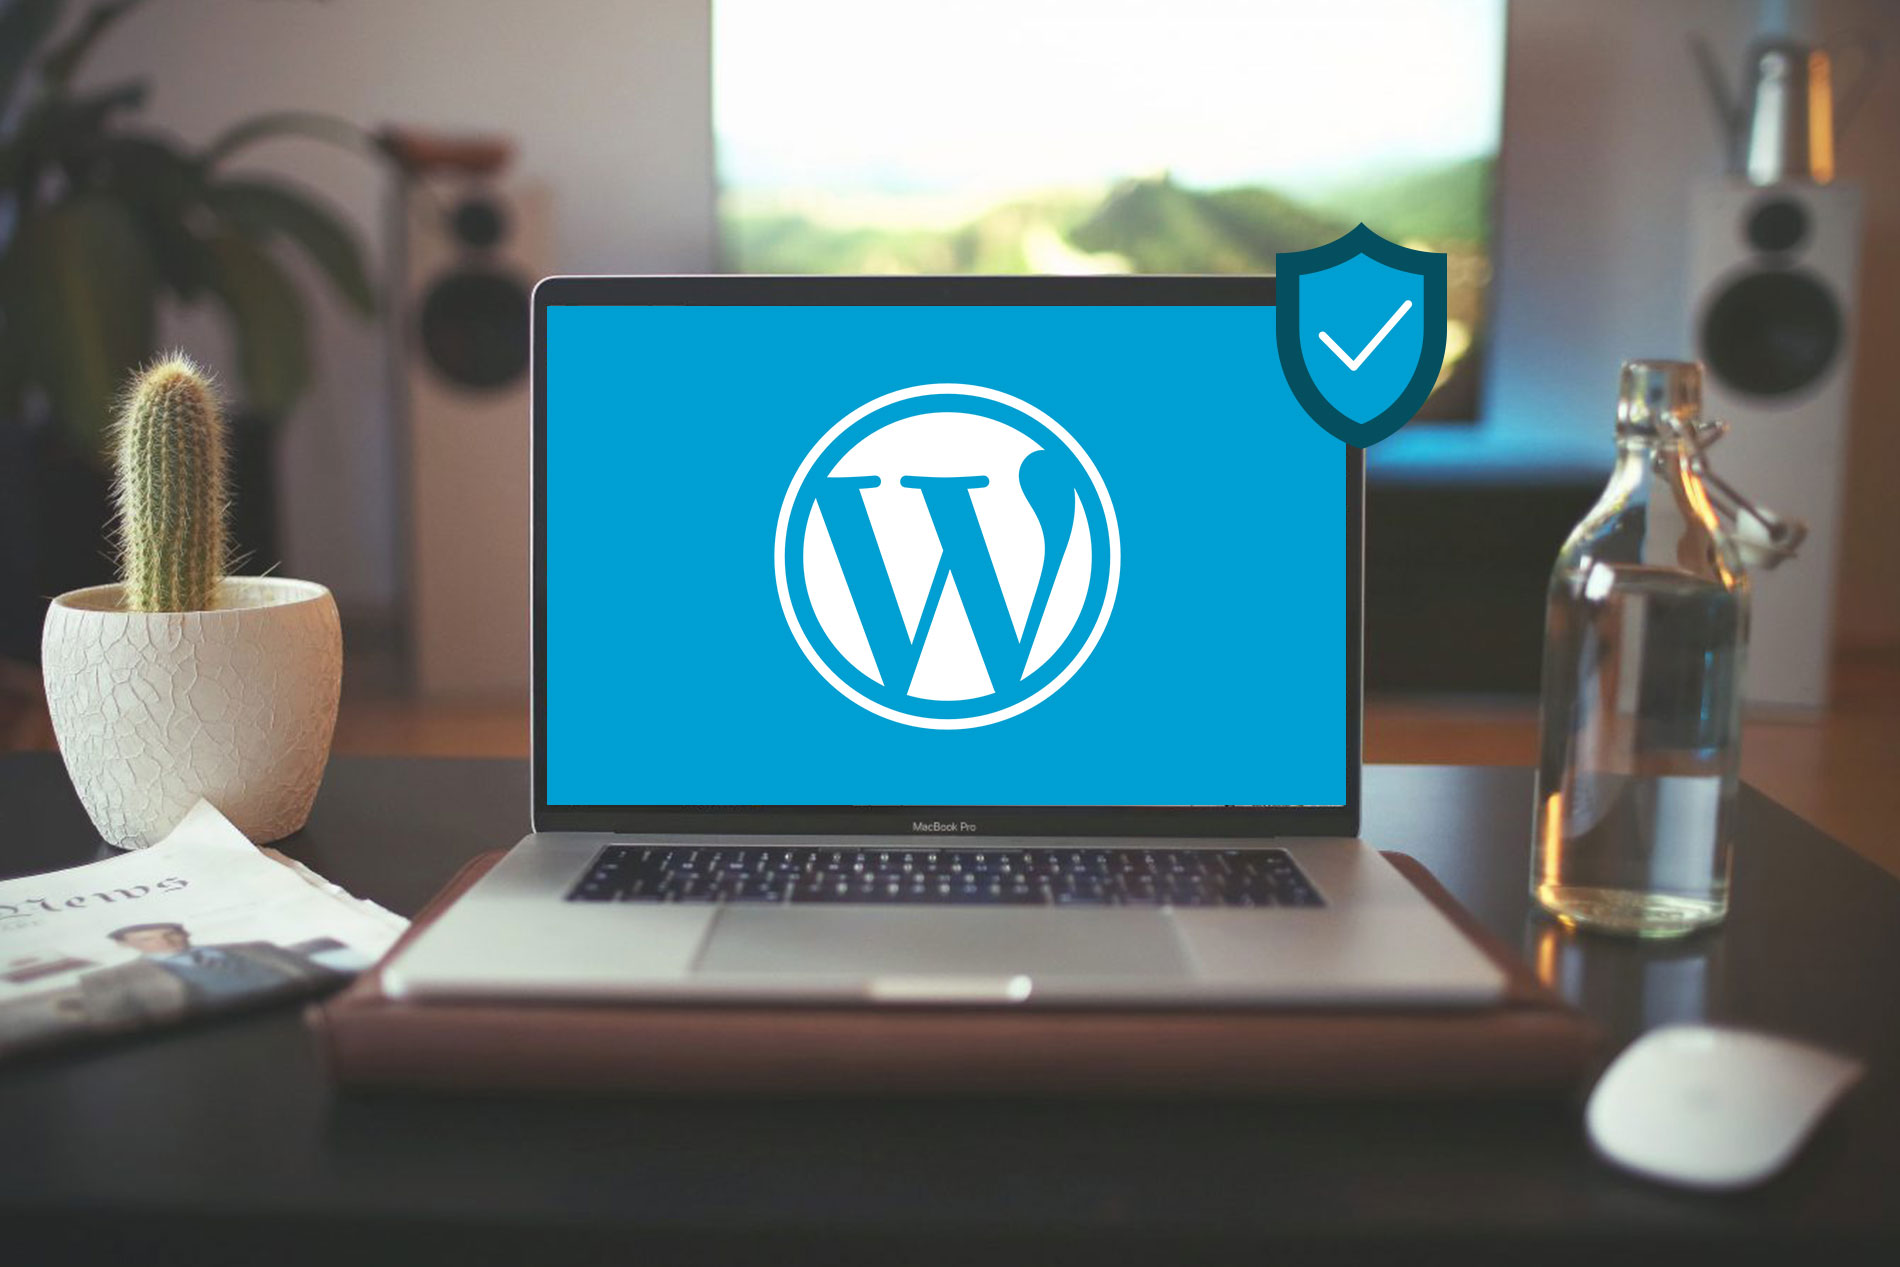 WordPress® Hardening: One-Click Security with cPanel